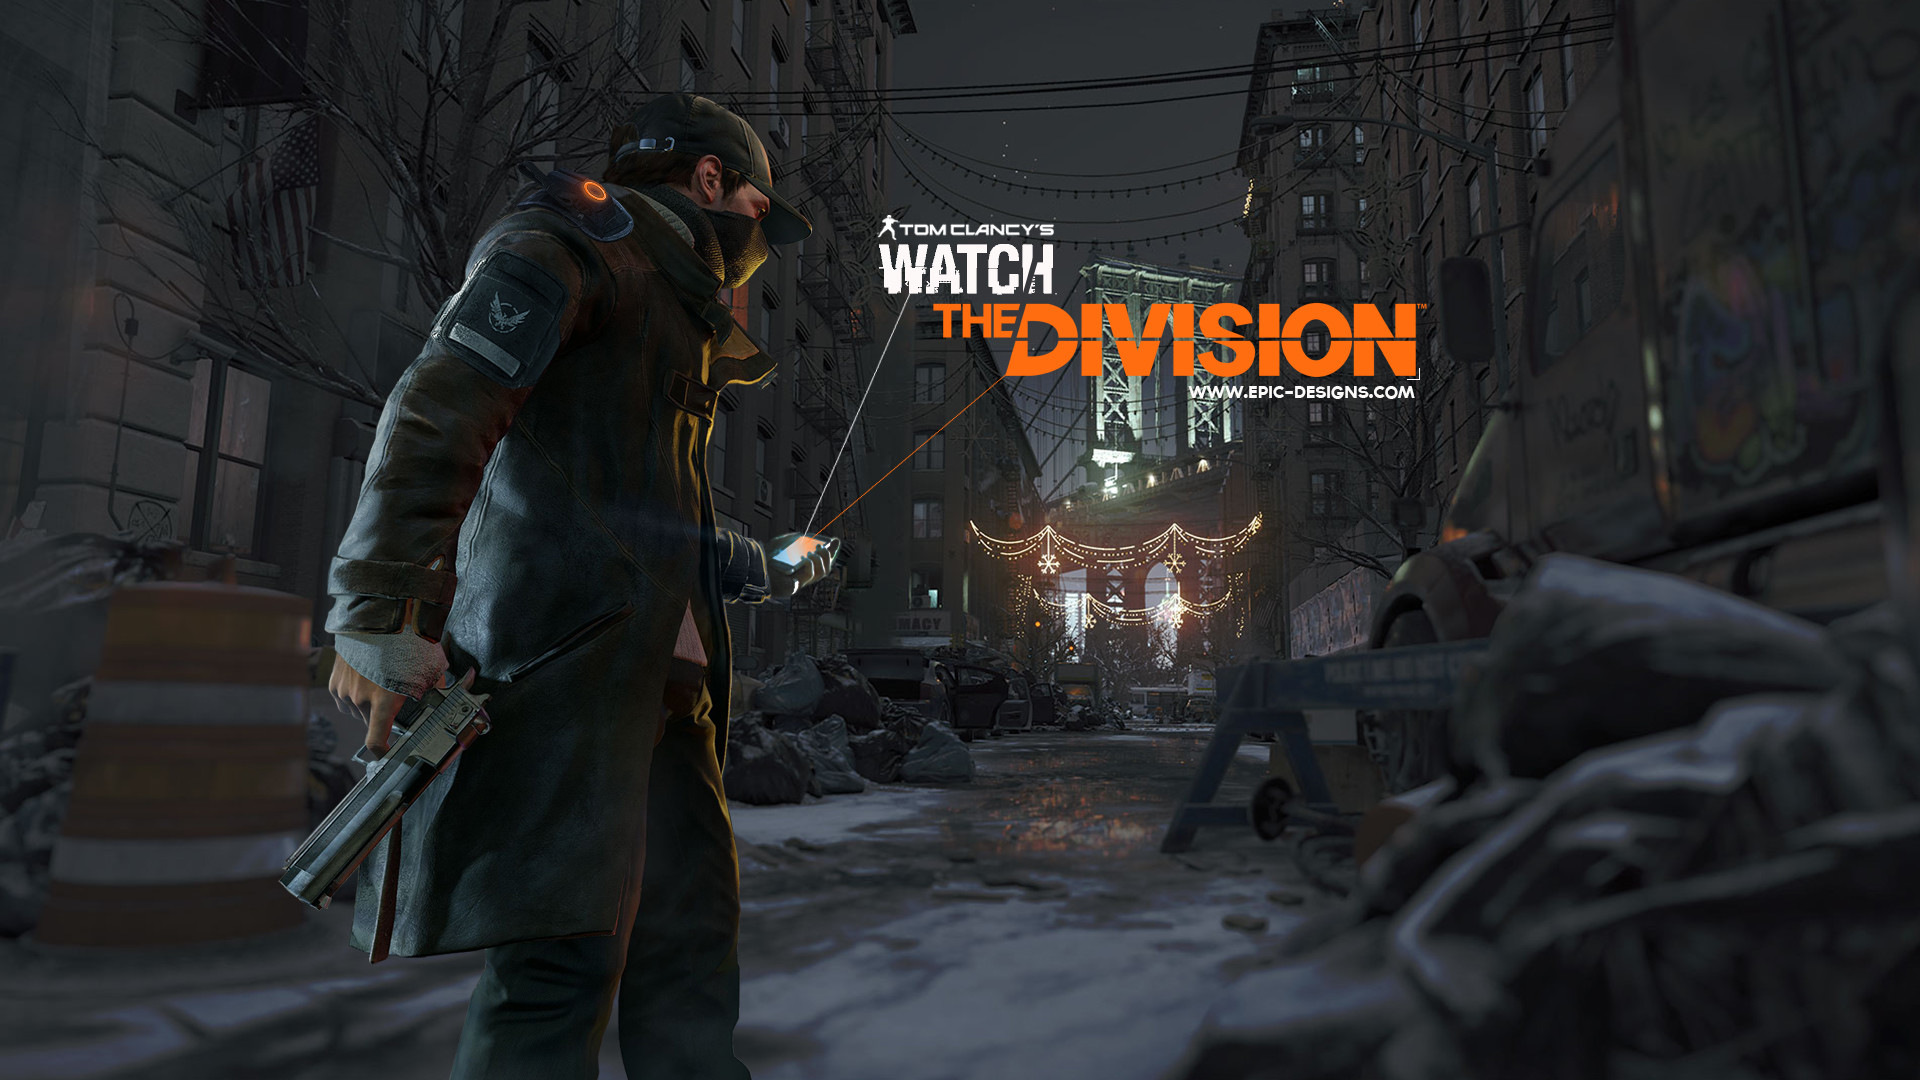 Watch the division wallpaper by EpicDesignsNL Watch the division wallpaper by EpicDesignsNL